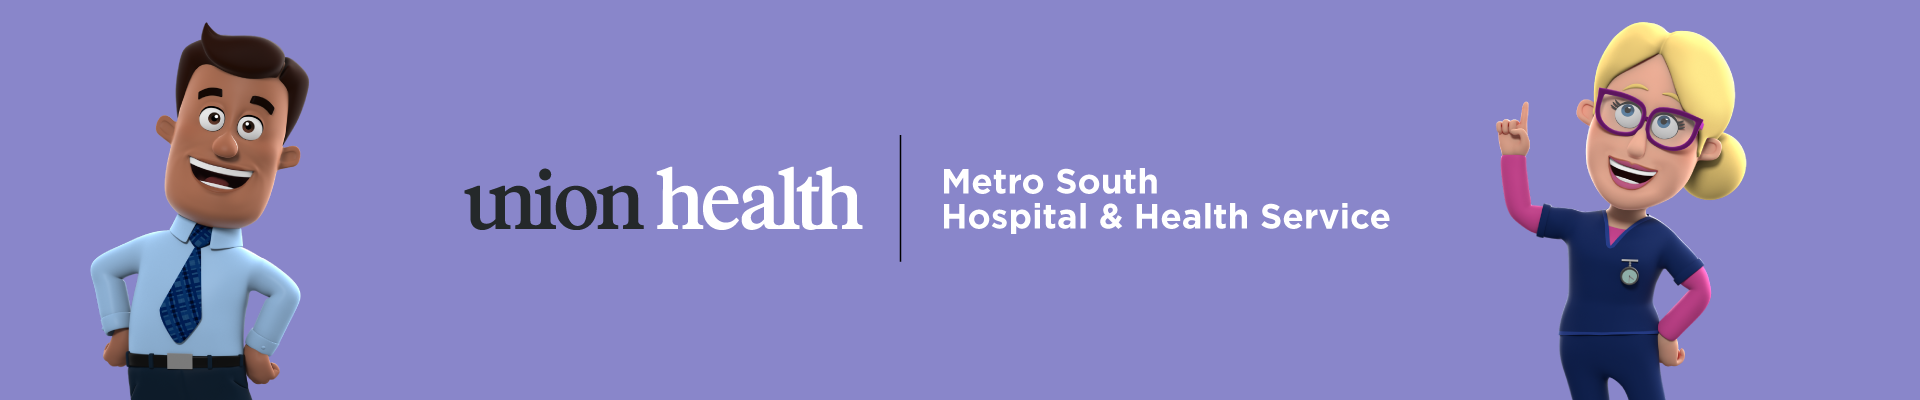 UH-Metro-South-HHS-1920x400.png